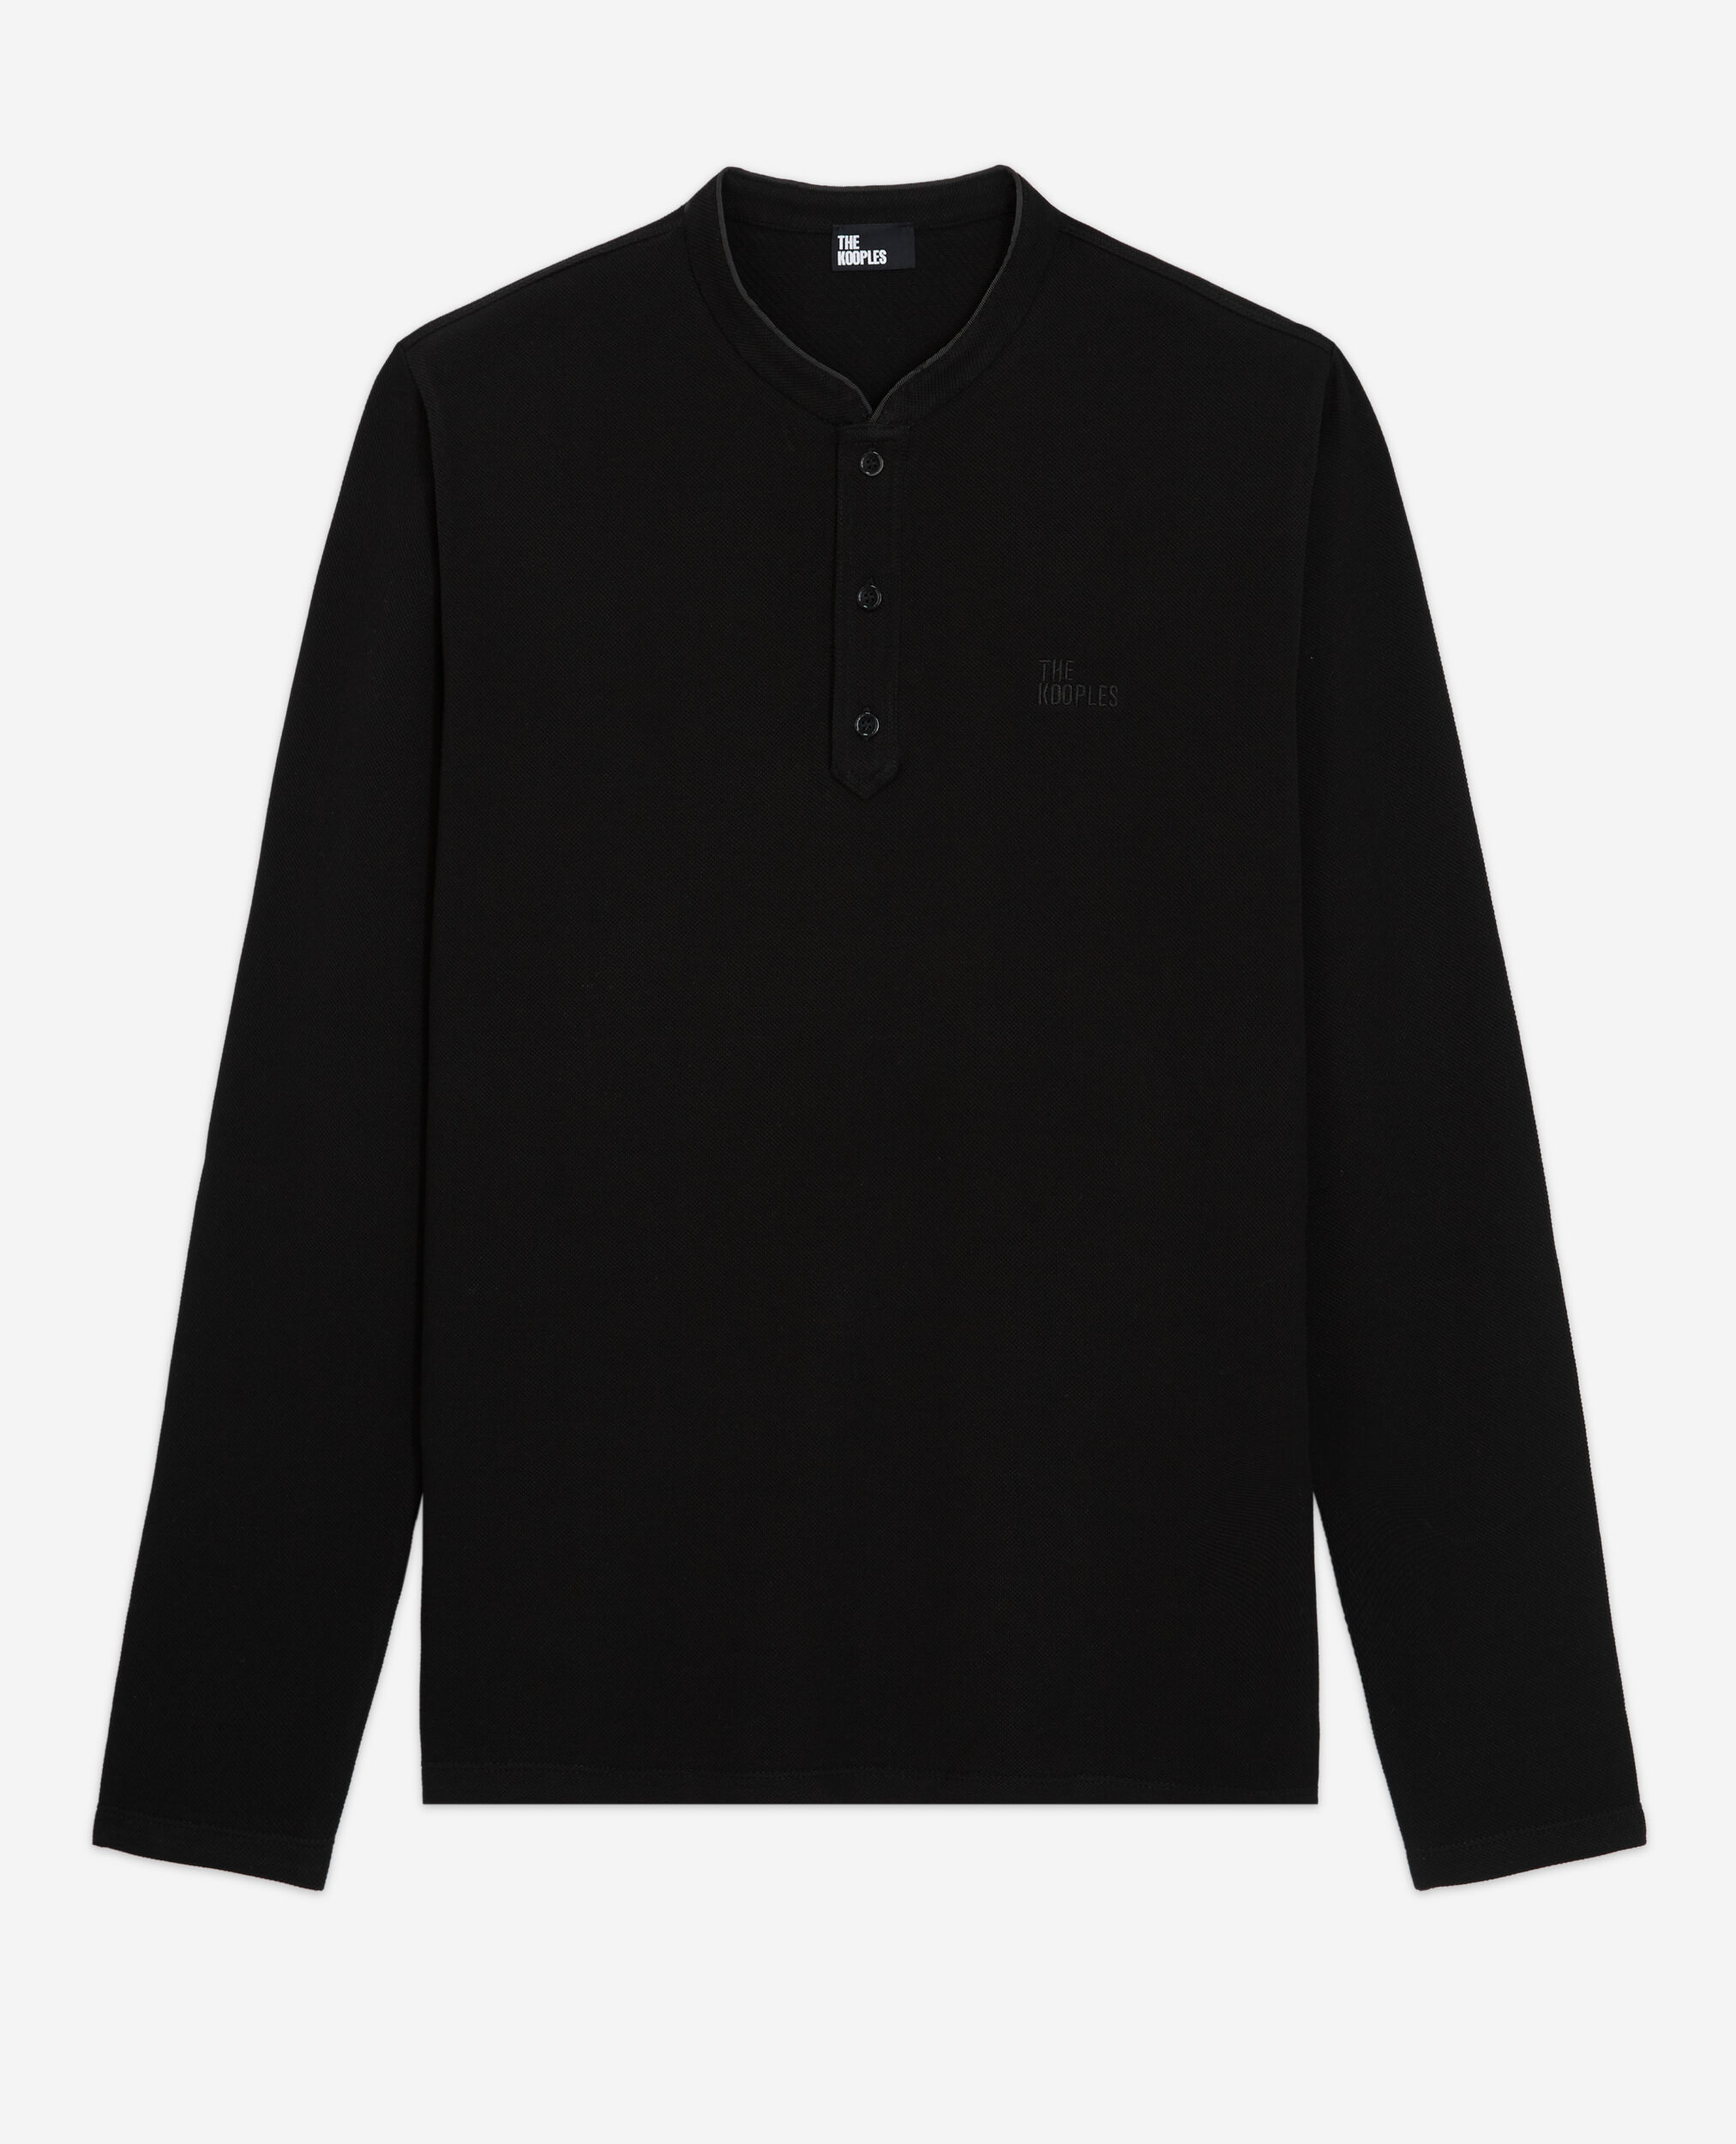 Camisa polo logotipo The Kooples negro, BLACK, hi-res image number null